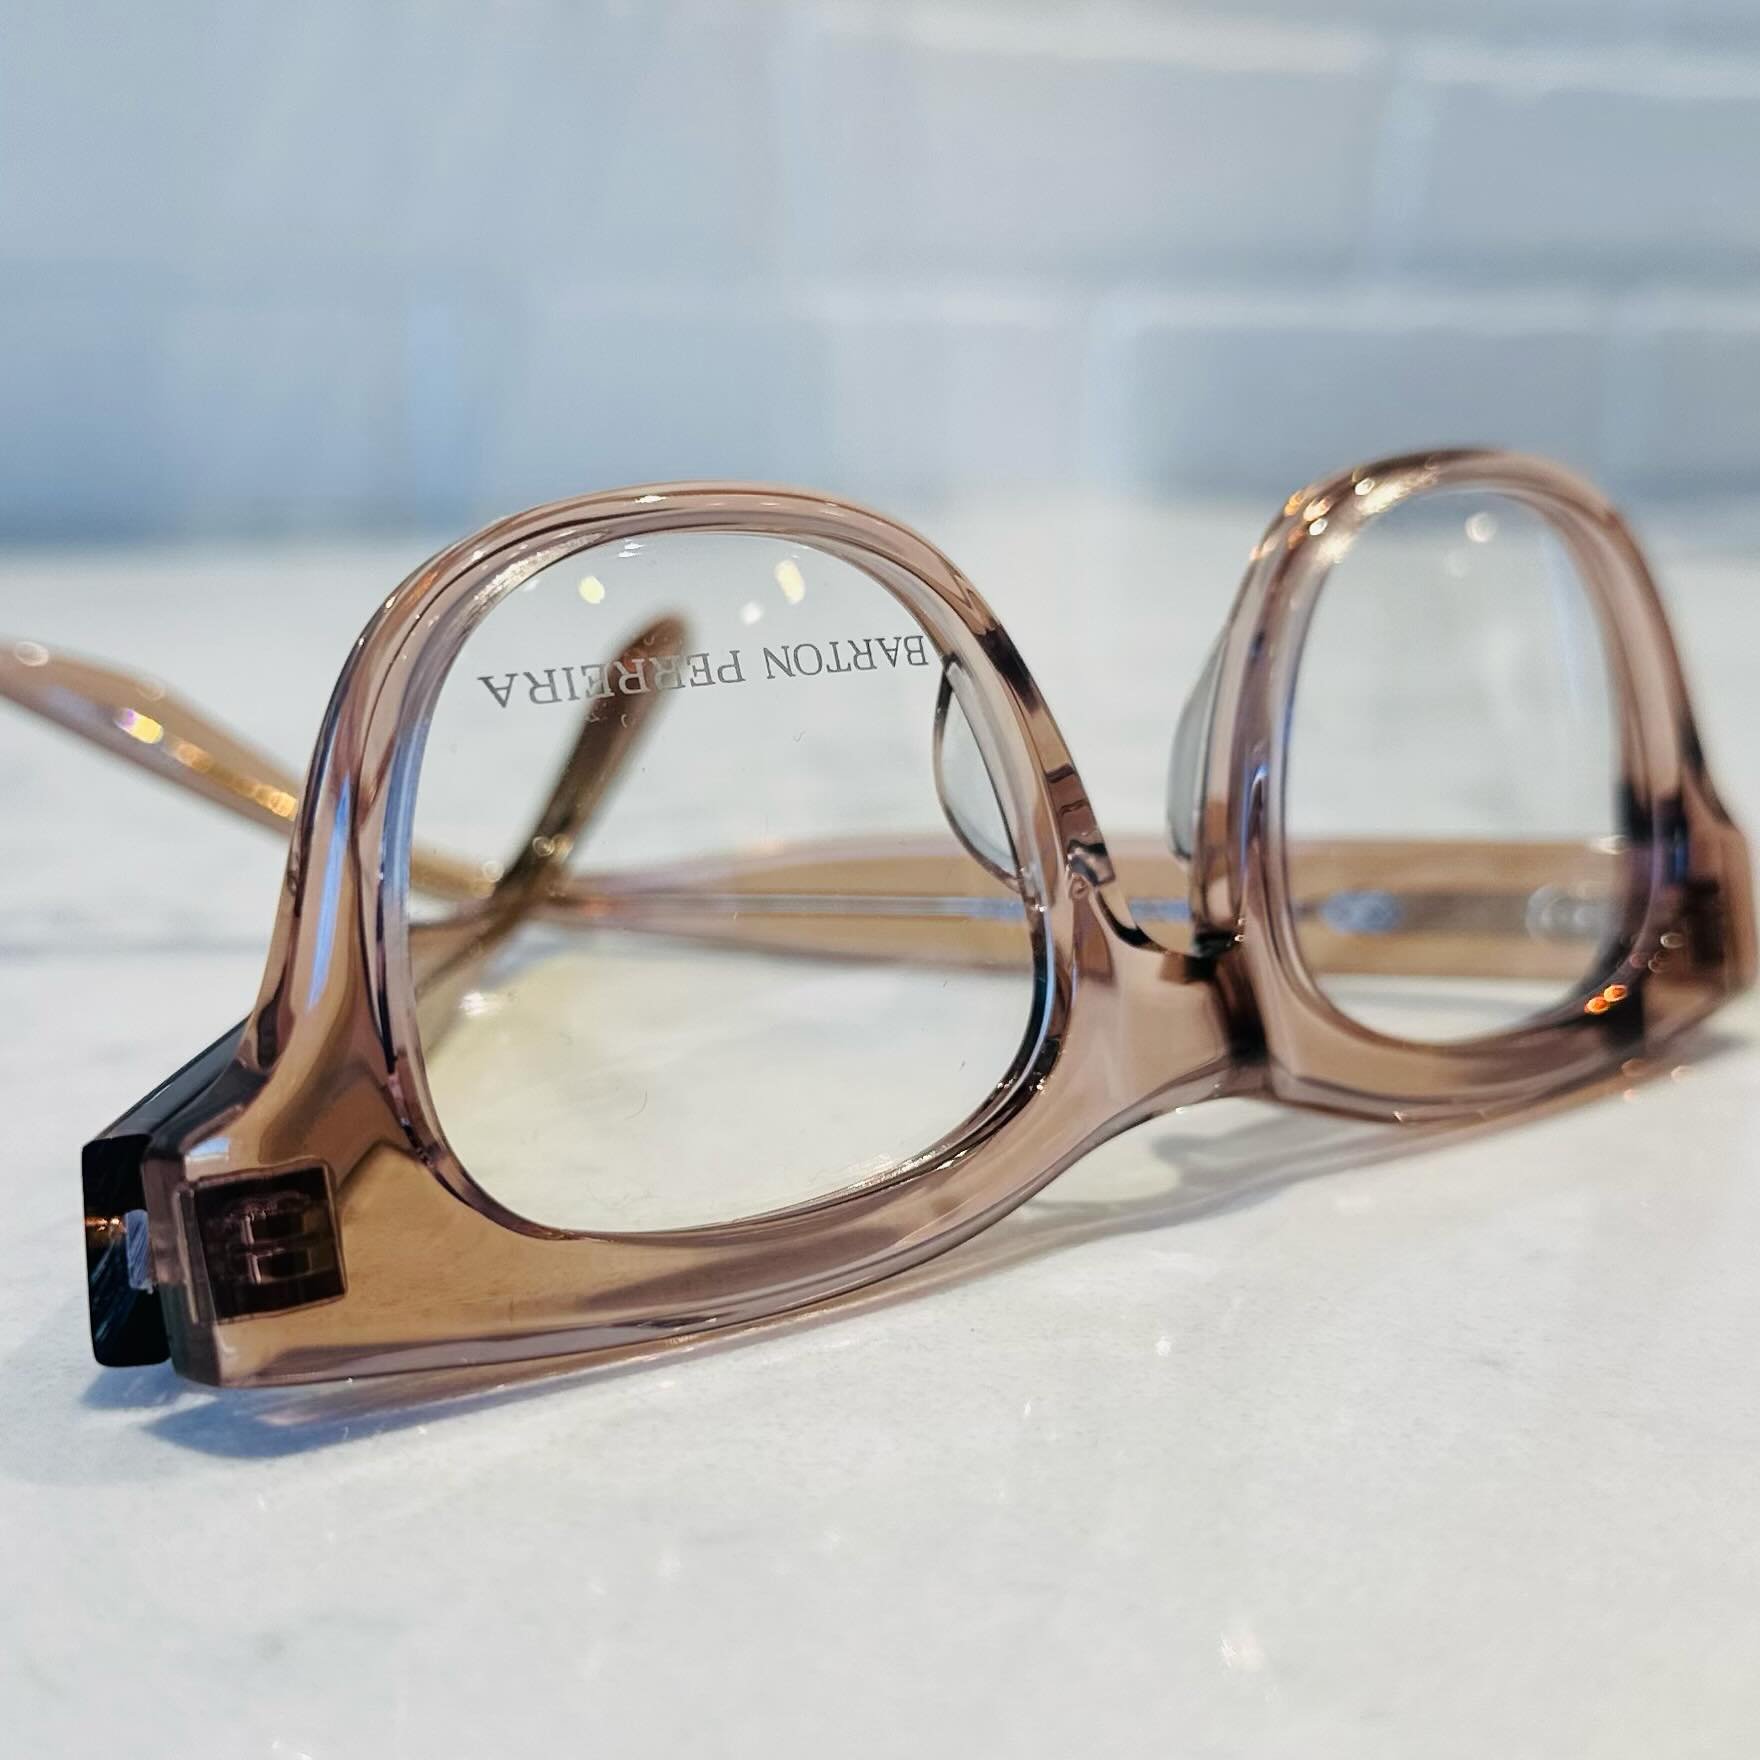 New @bartonperreira frames are here, and we are OBSESSED!! 😍 🙌🏻🤓 Come check them out! #eyes #eyeglasses #glasses #sunglasses #eyeexam #eyedoctor #optometrist #optometry #spectacle #spectacles #shopsmall #familyowned #spectacleoptometry #seebetter